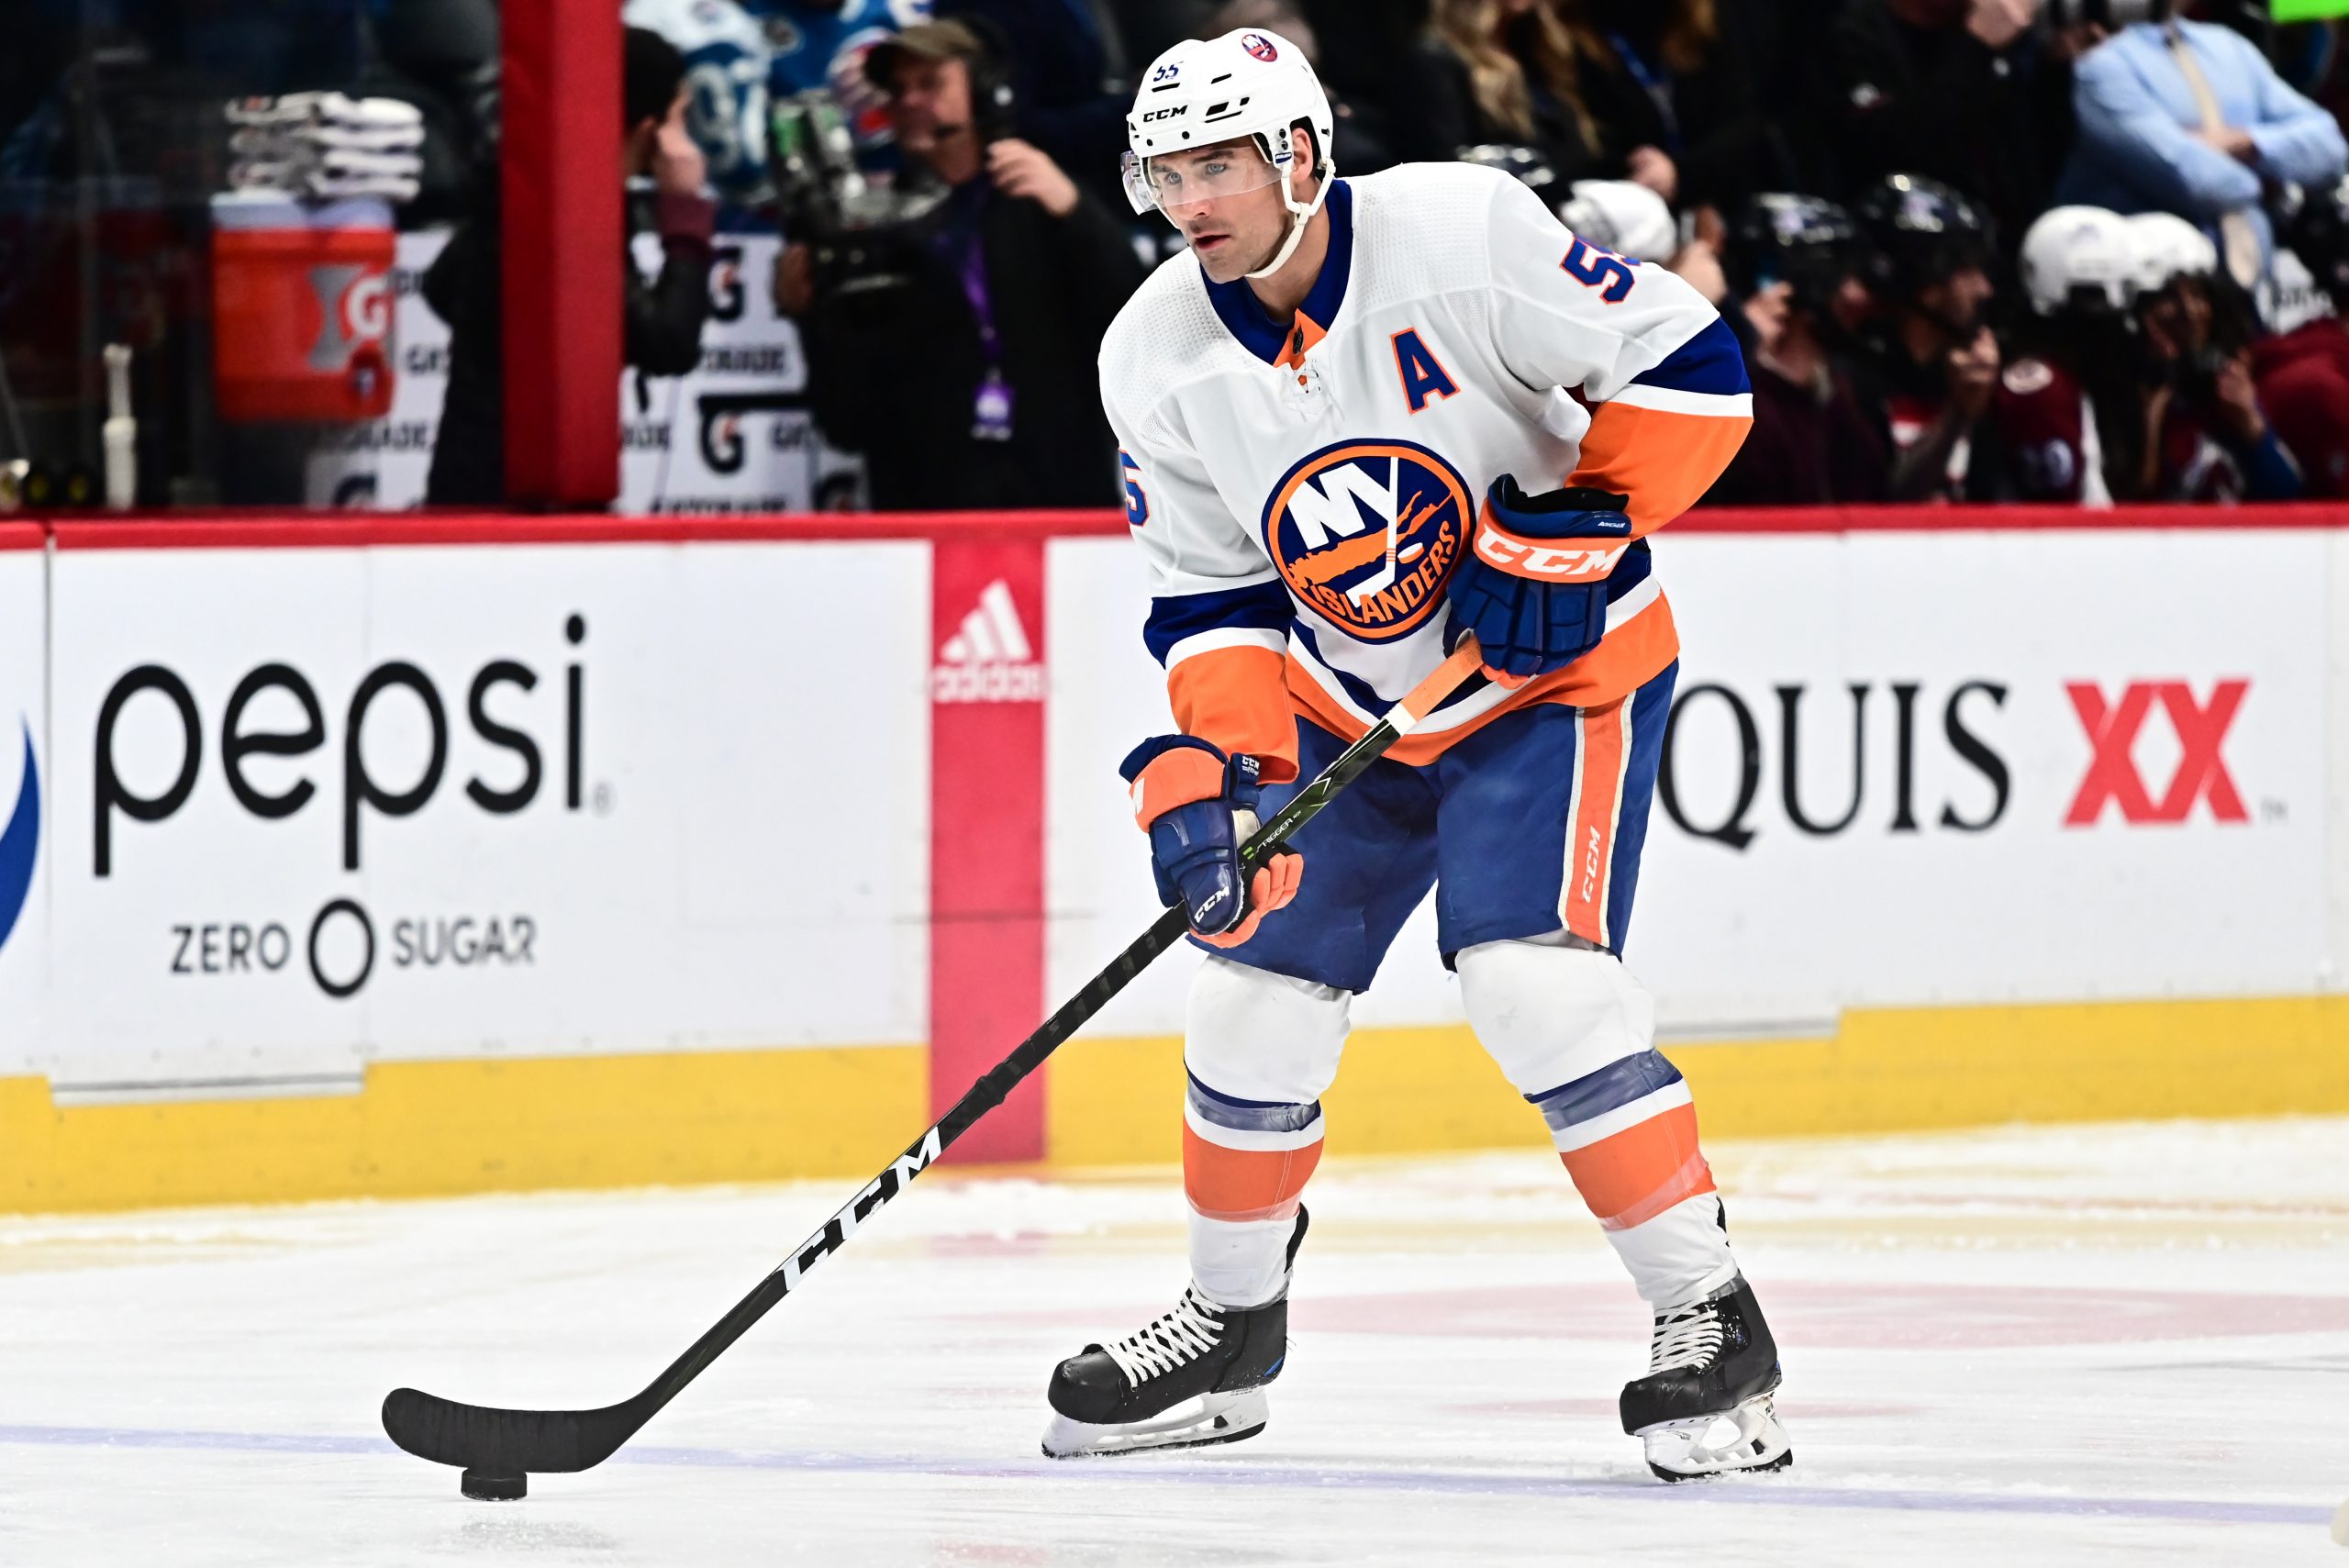 Boychuk out for Islanders after 90-stitch cut to eyelid - Long